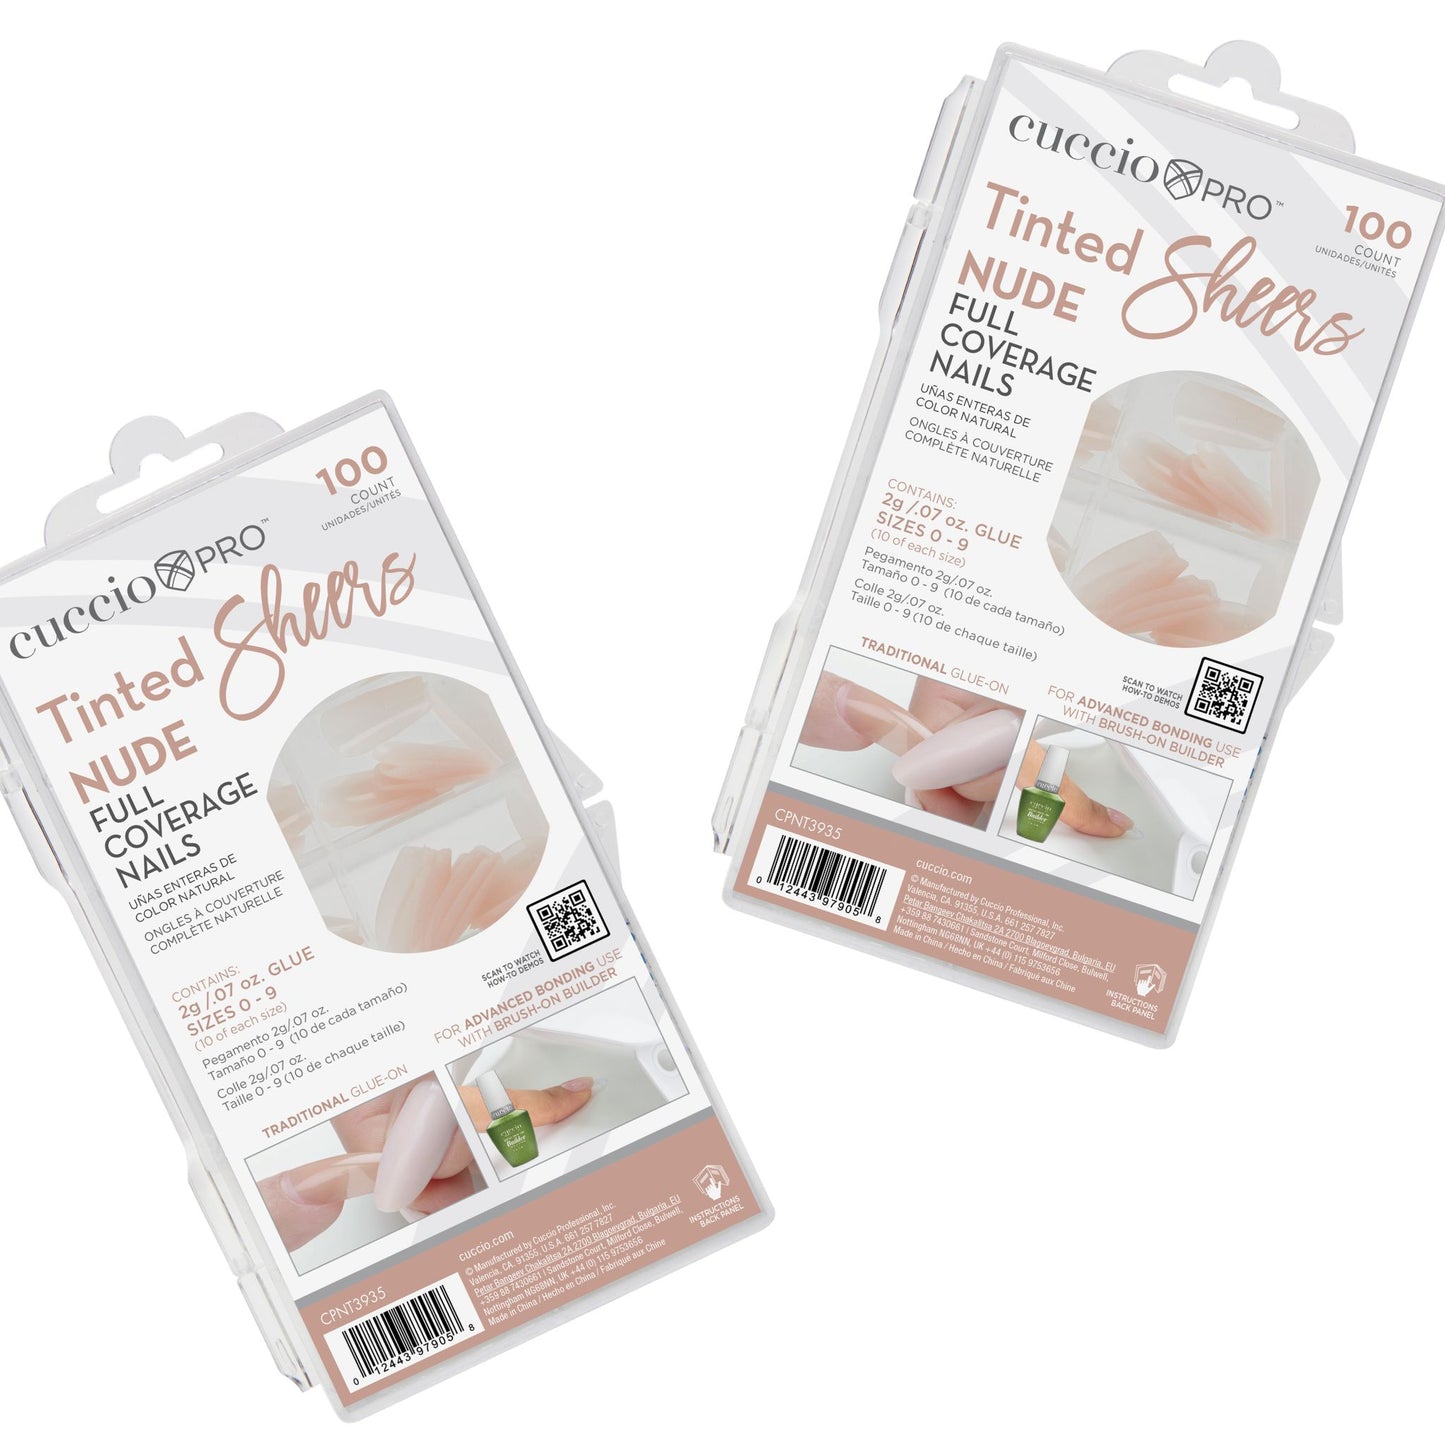 Bundle: 2 Full Coverage Nail Tips - Nude Tinted Sheers - 200 Count